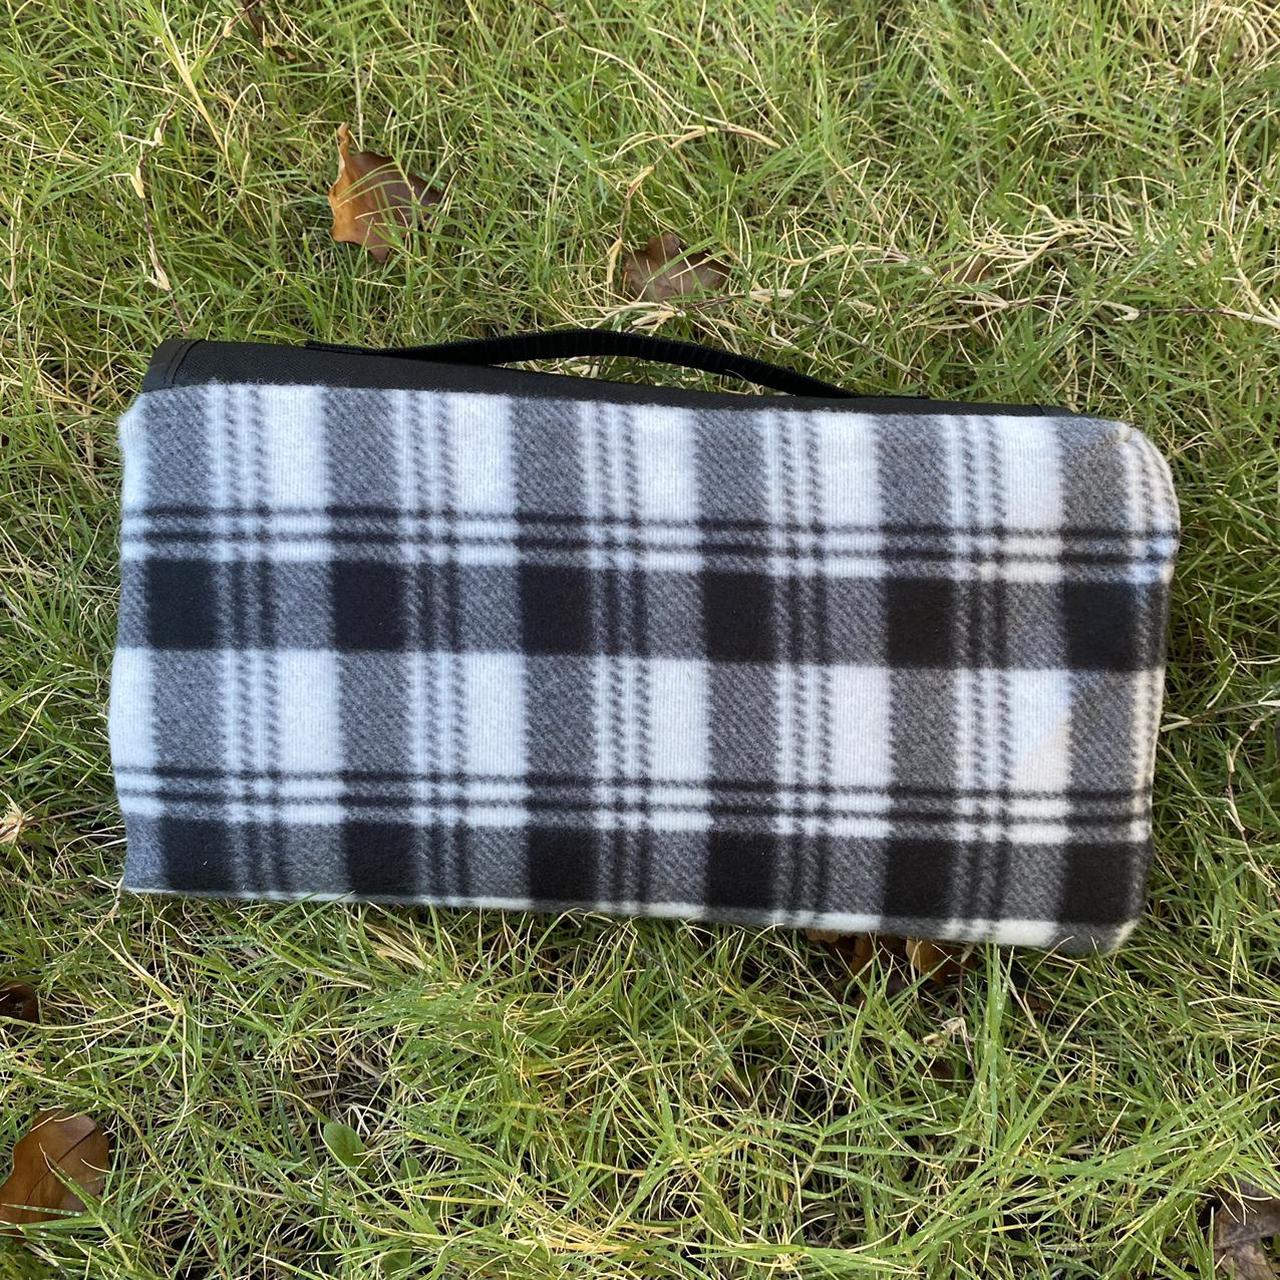 Product Image 2 - NFL Raiders Checkered Outdoor Blanket.